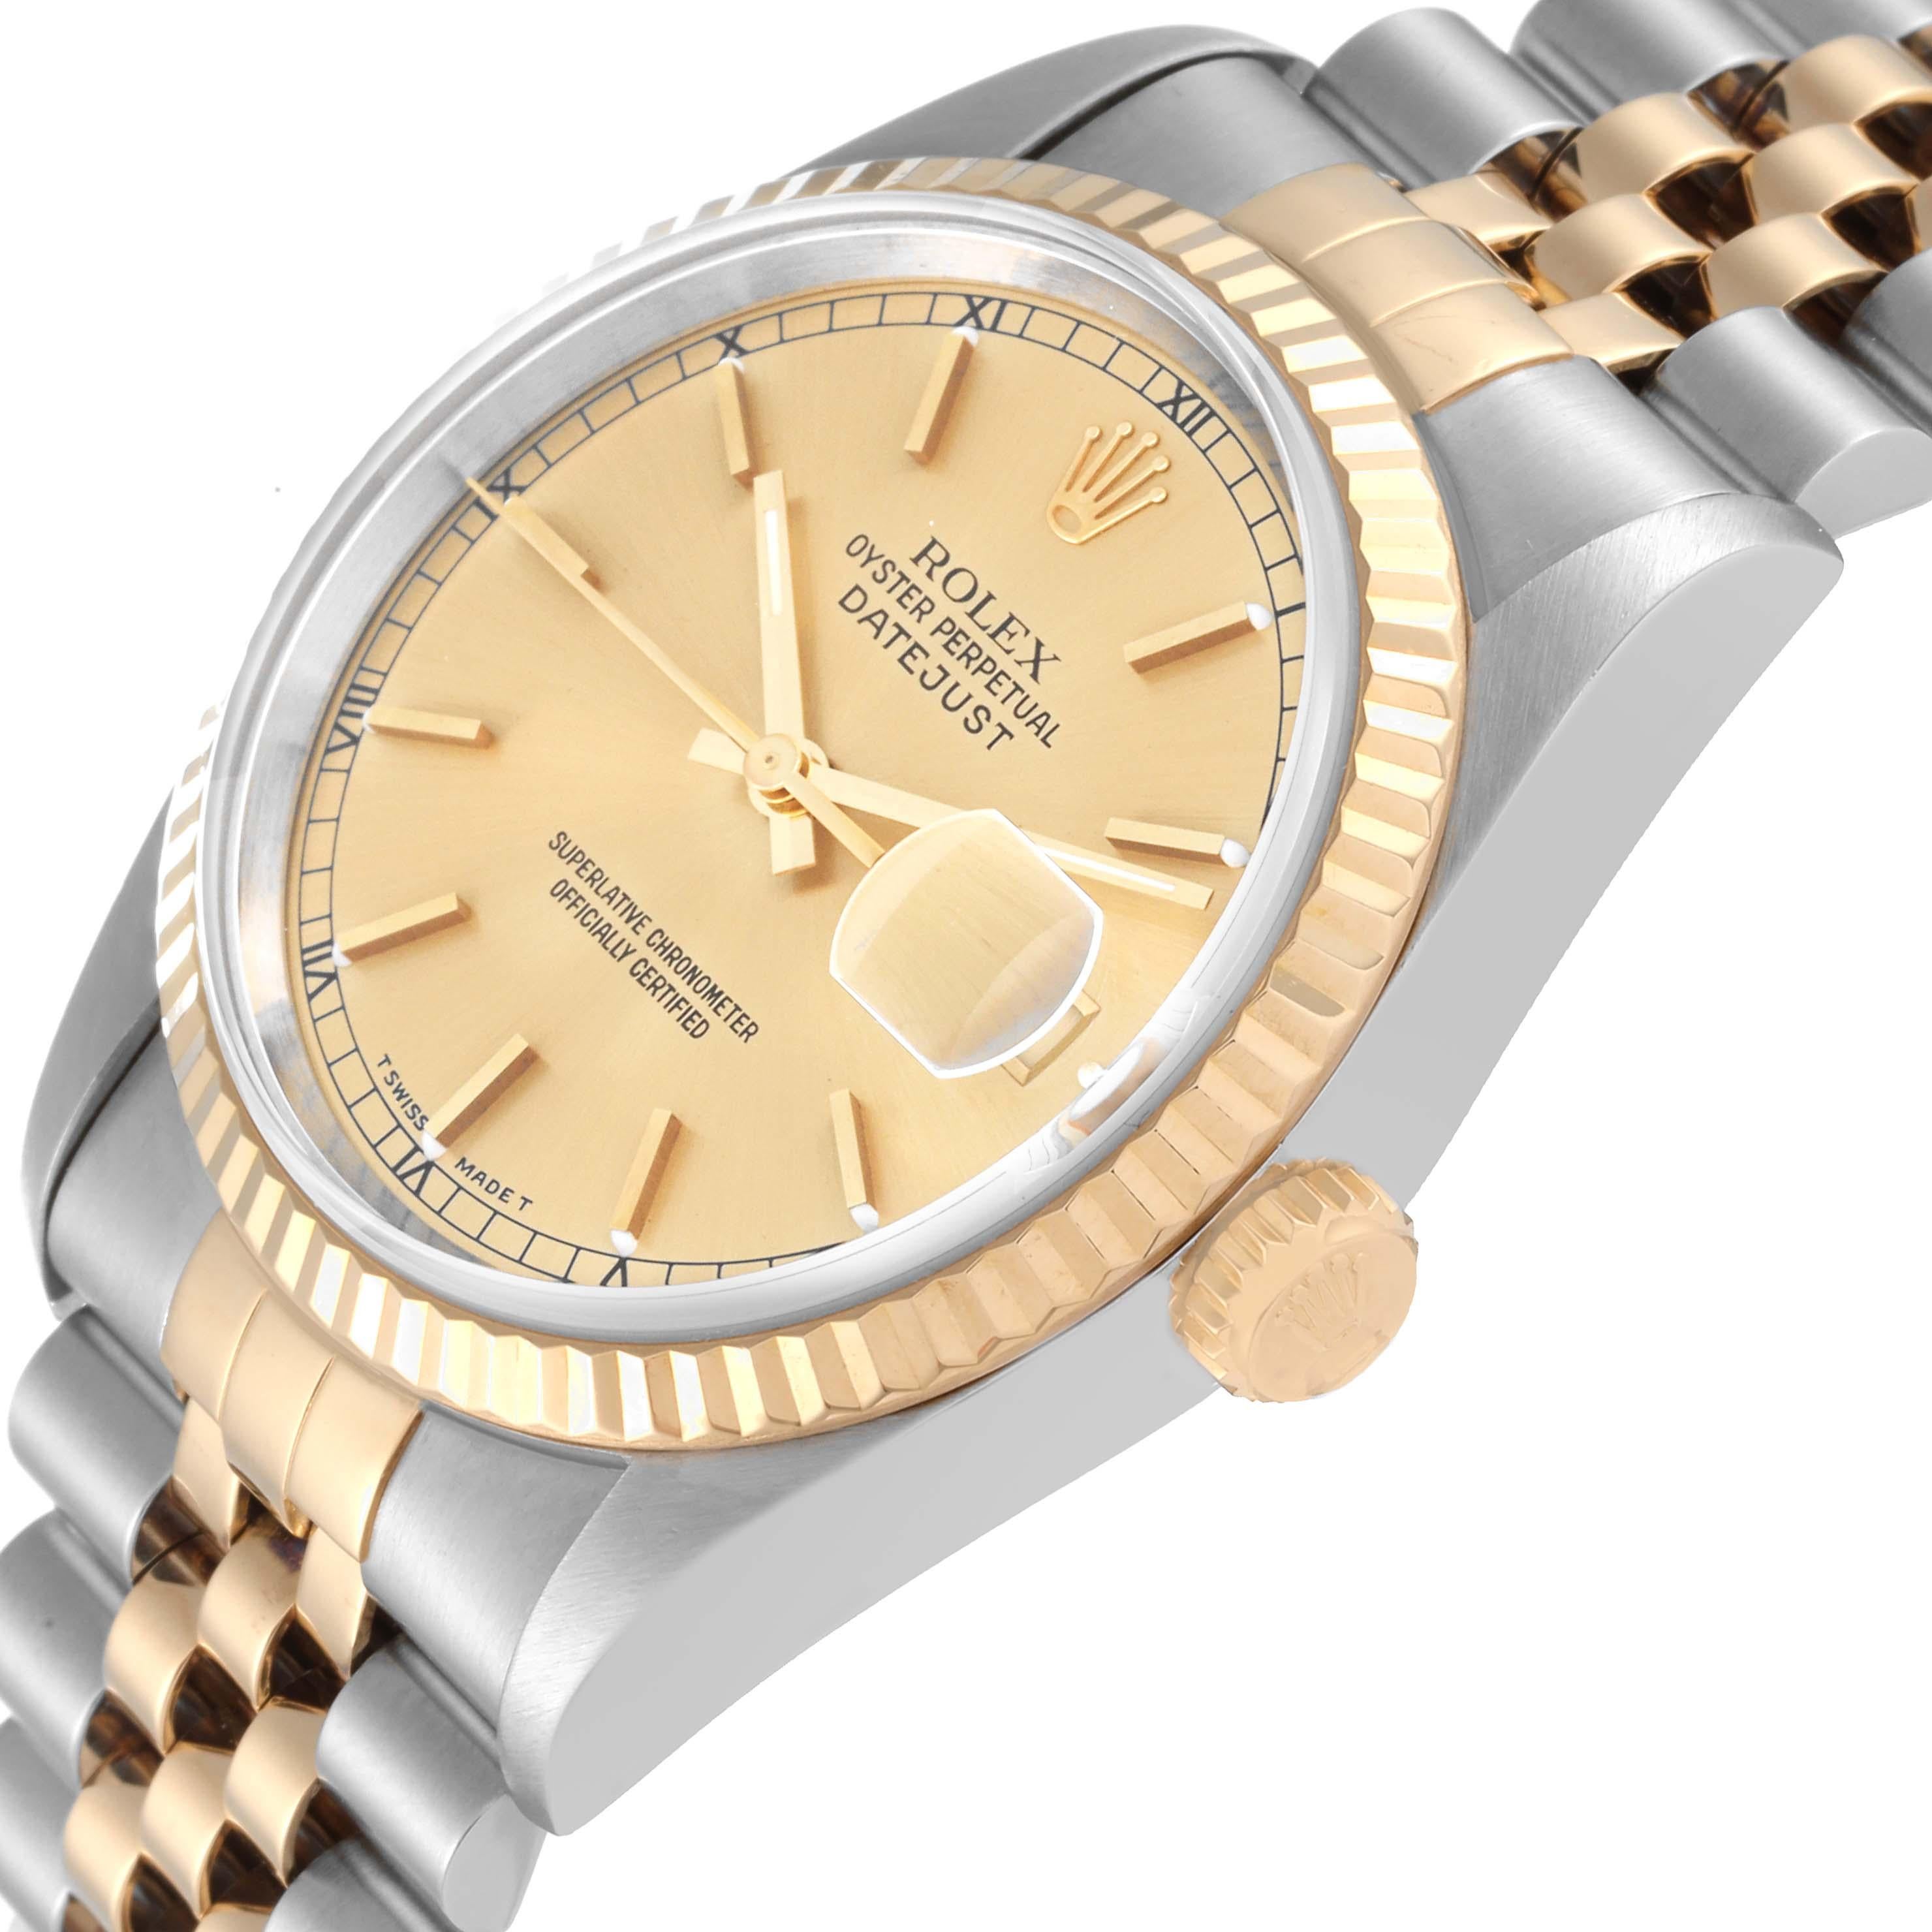 Men's Rolex Datejust 36 Steel Yellow Gold Champagne Dial Mens Watch 16233 Box Papers